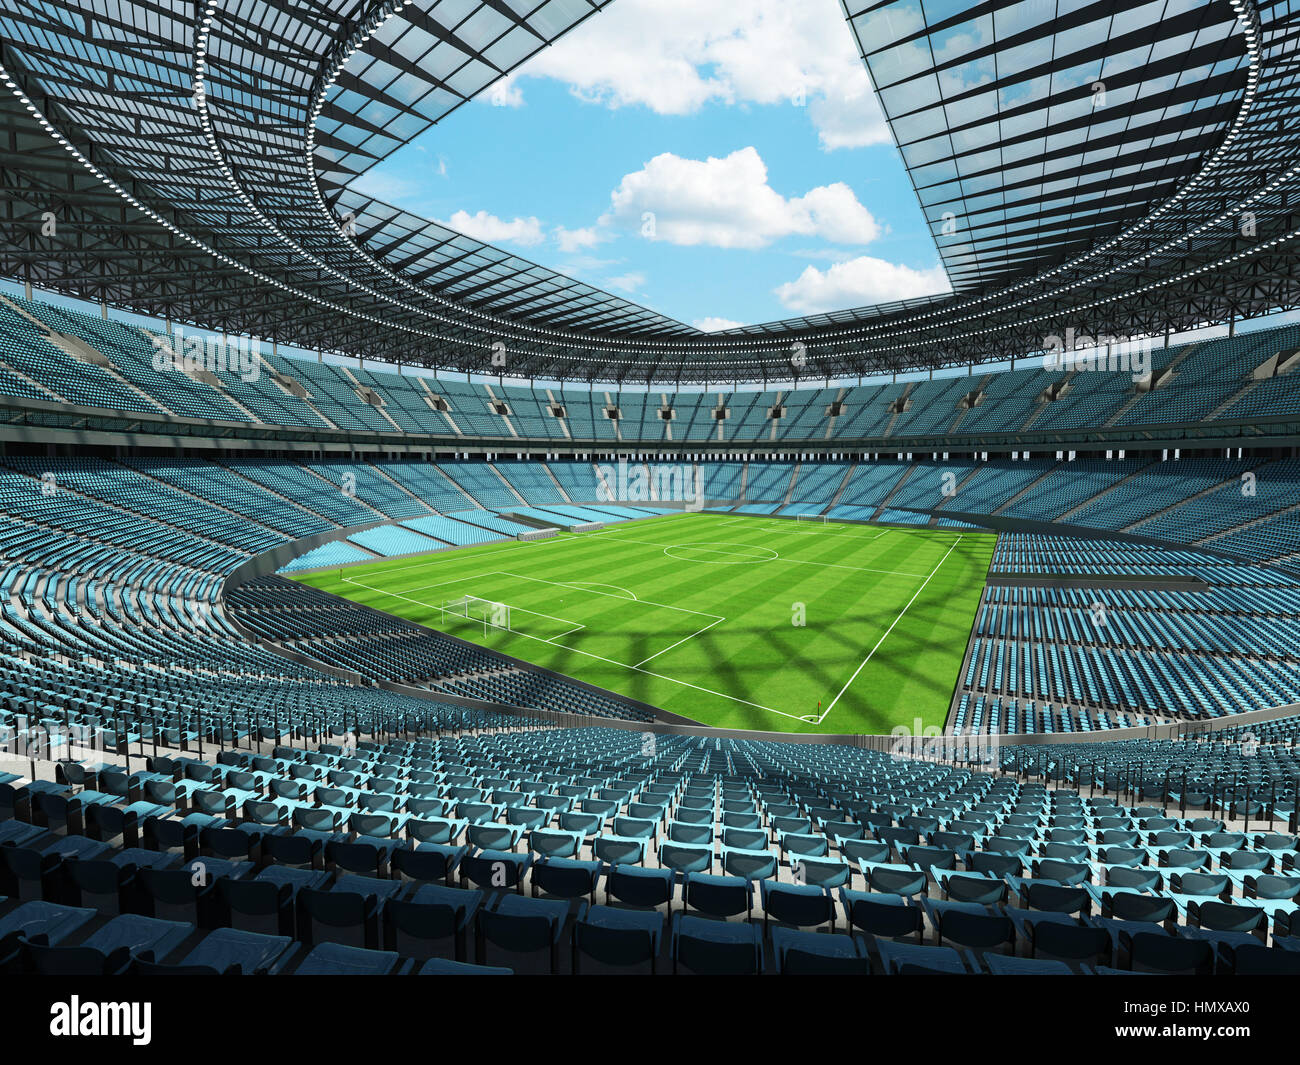 3D Render Of A Large Capacity Soccer - Football Stadium With An Open Roof  And Green Seats Stock Photo, Picture and Royalty Free Image. Image 68520114.